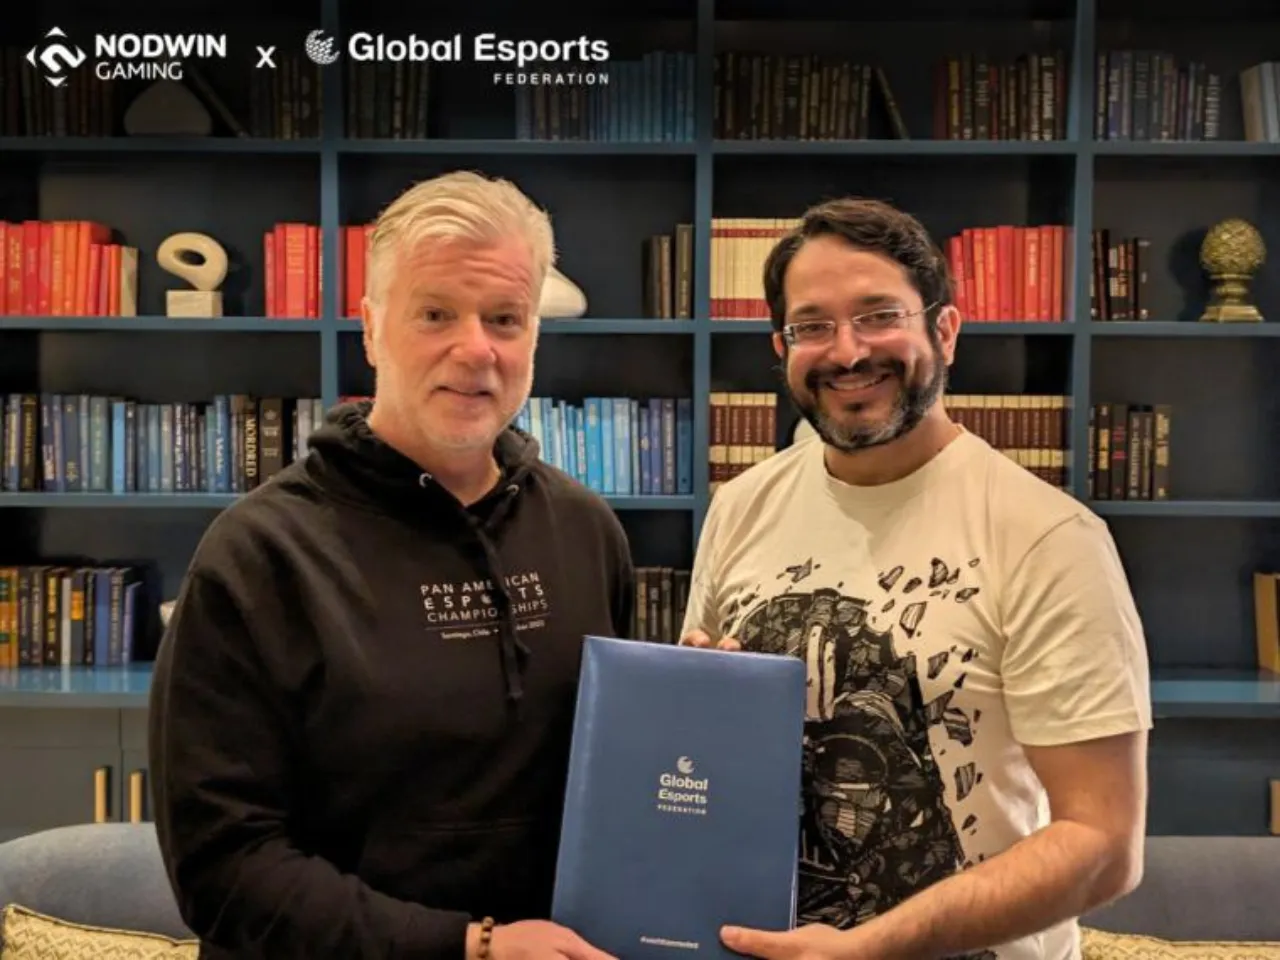 NODWIN Gaming partners with Global Esports Federation